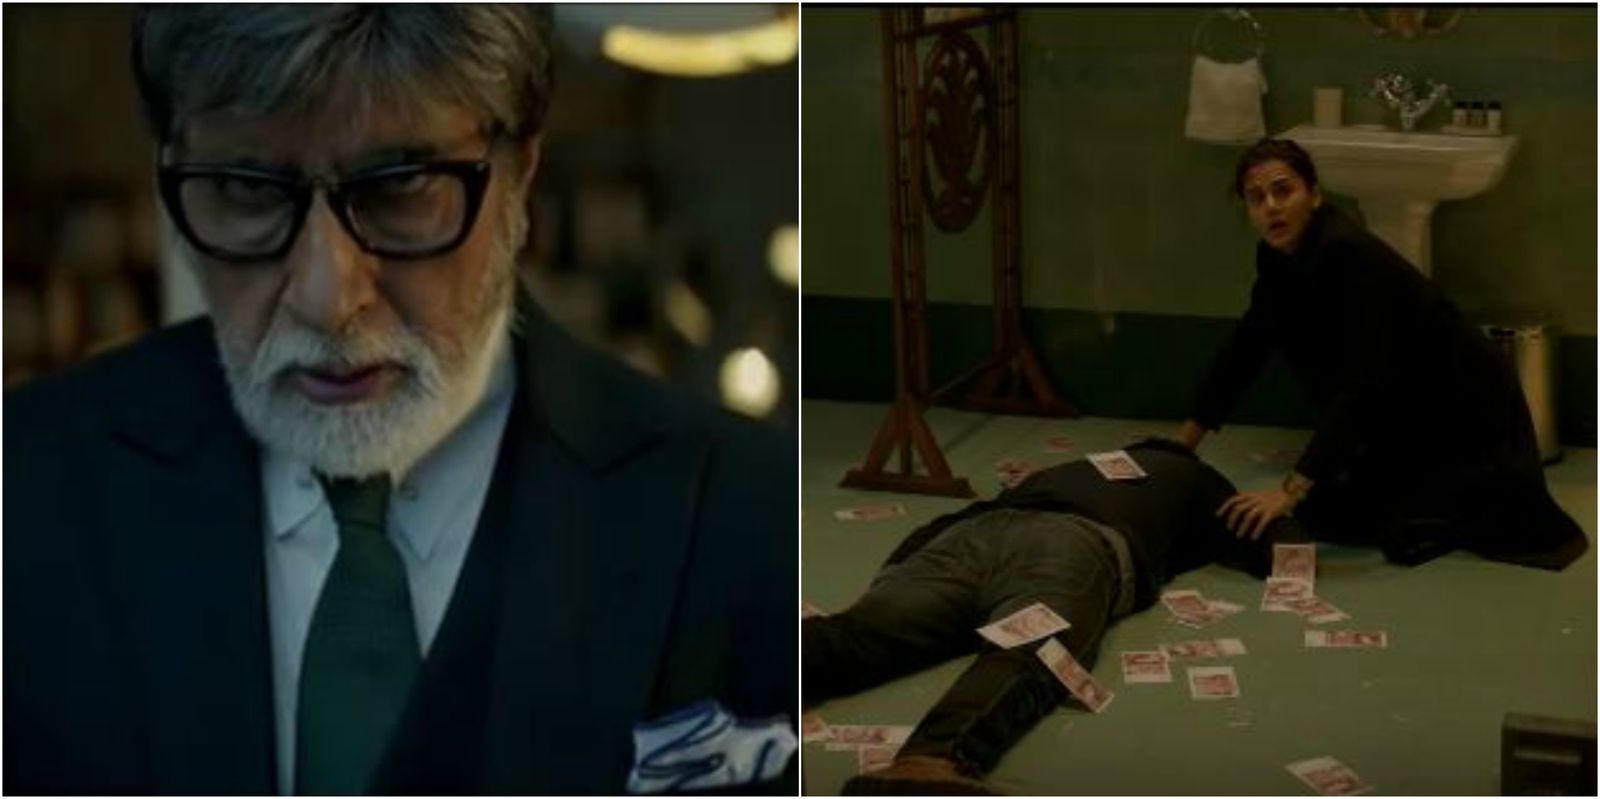 Badla Trailer: Taapsee Pannu And Amitabh Bachchan Starrer Will Leave You With A Lot Of Questions And A Feeling Of Gloom